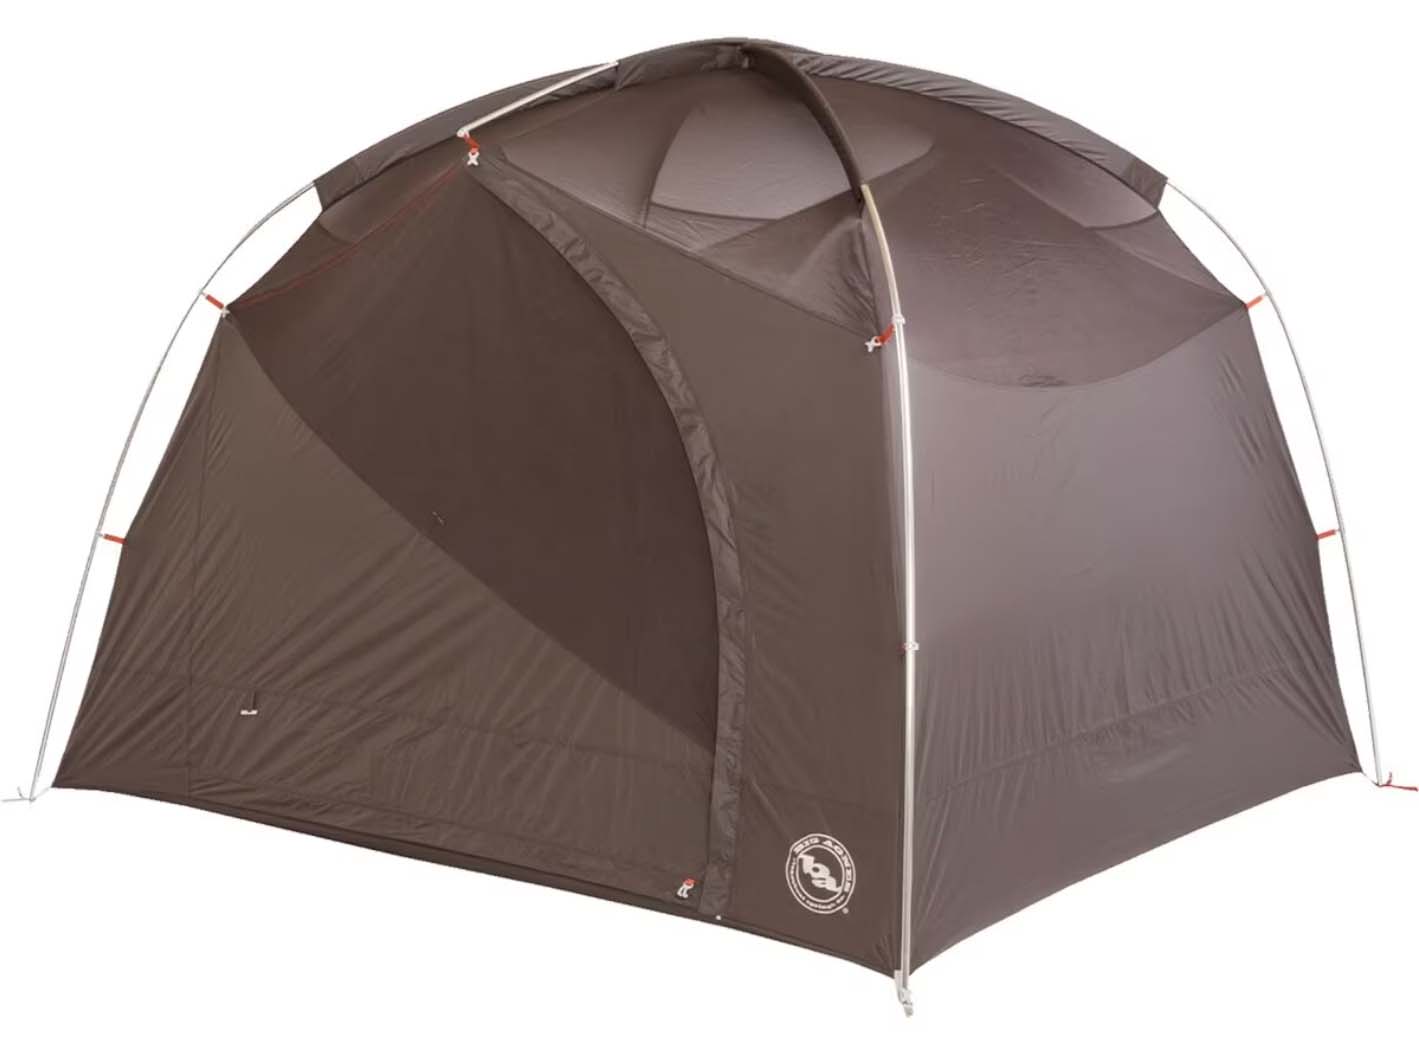 Top Rated Tents